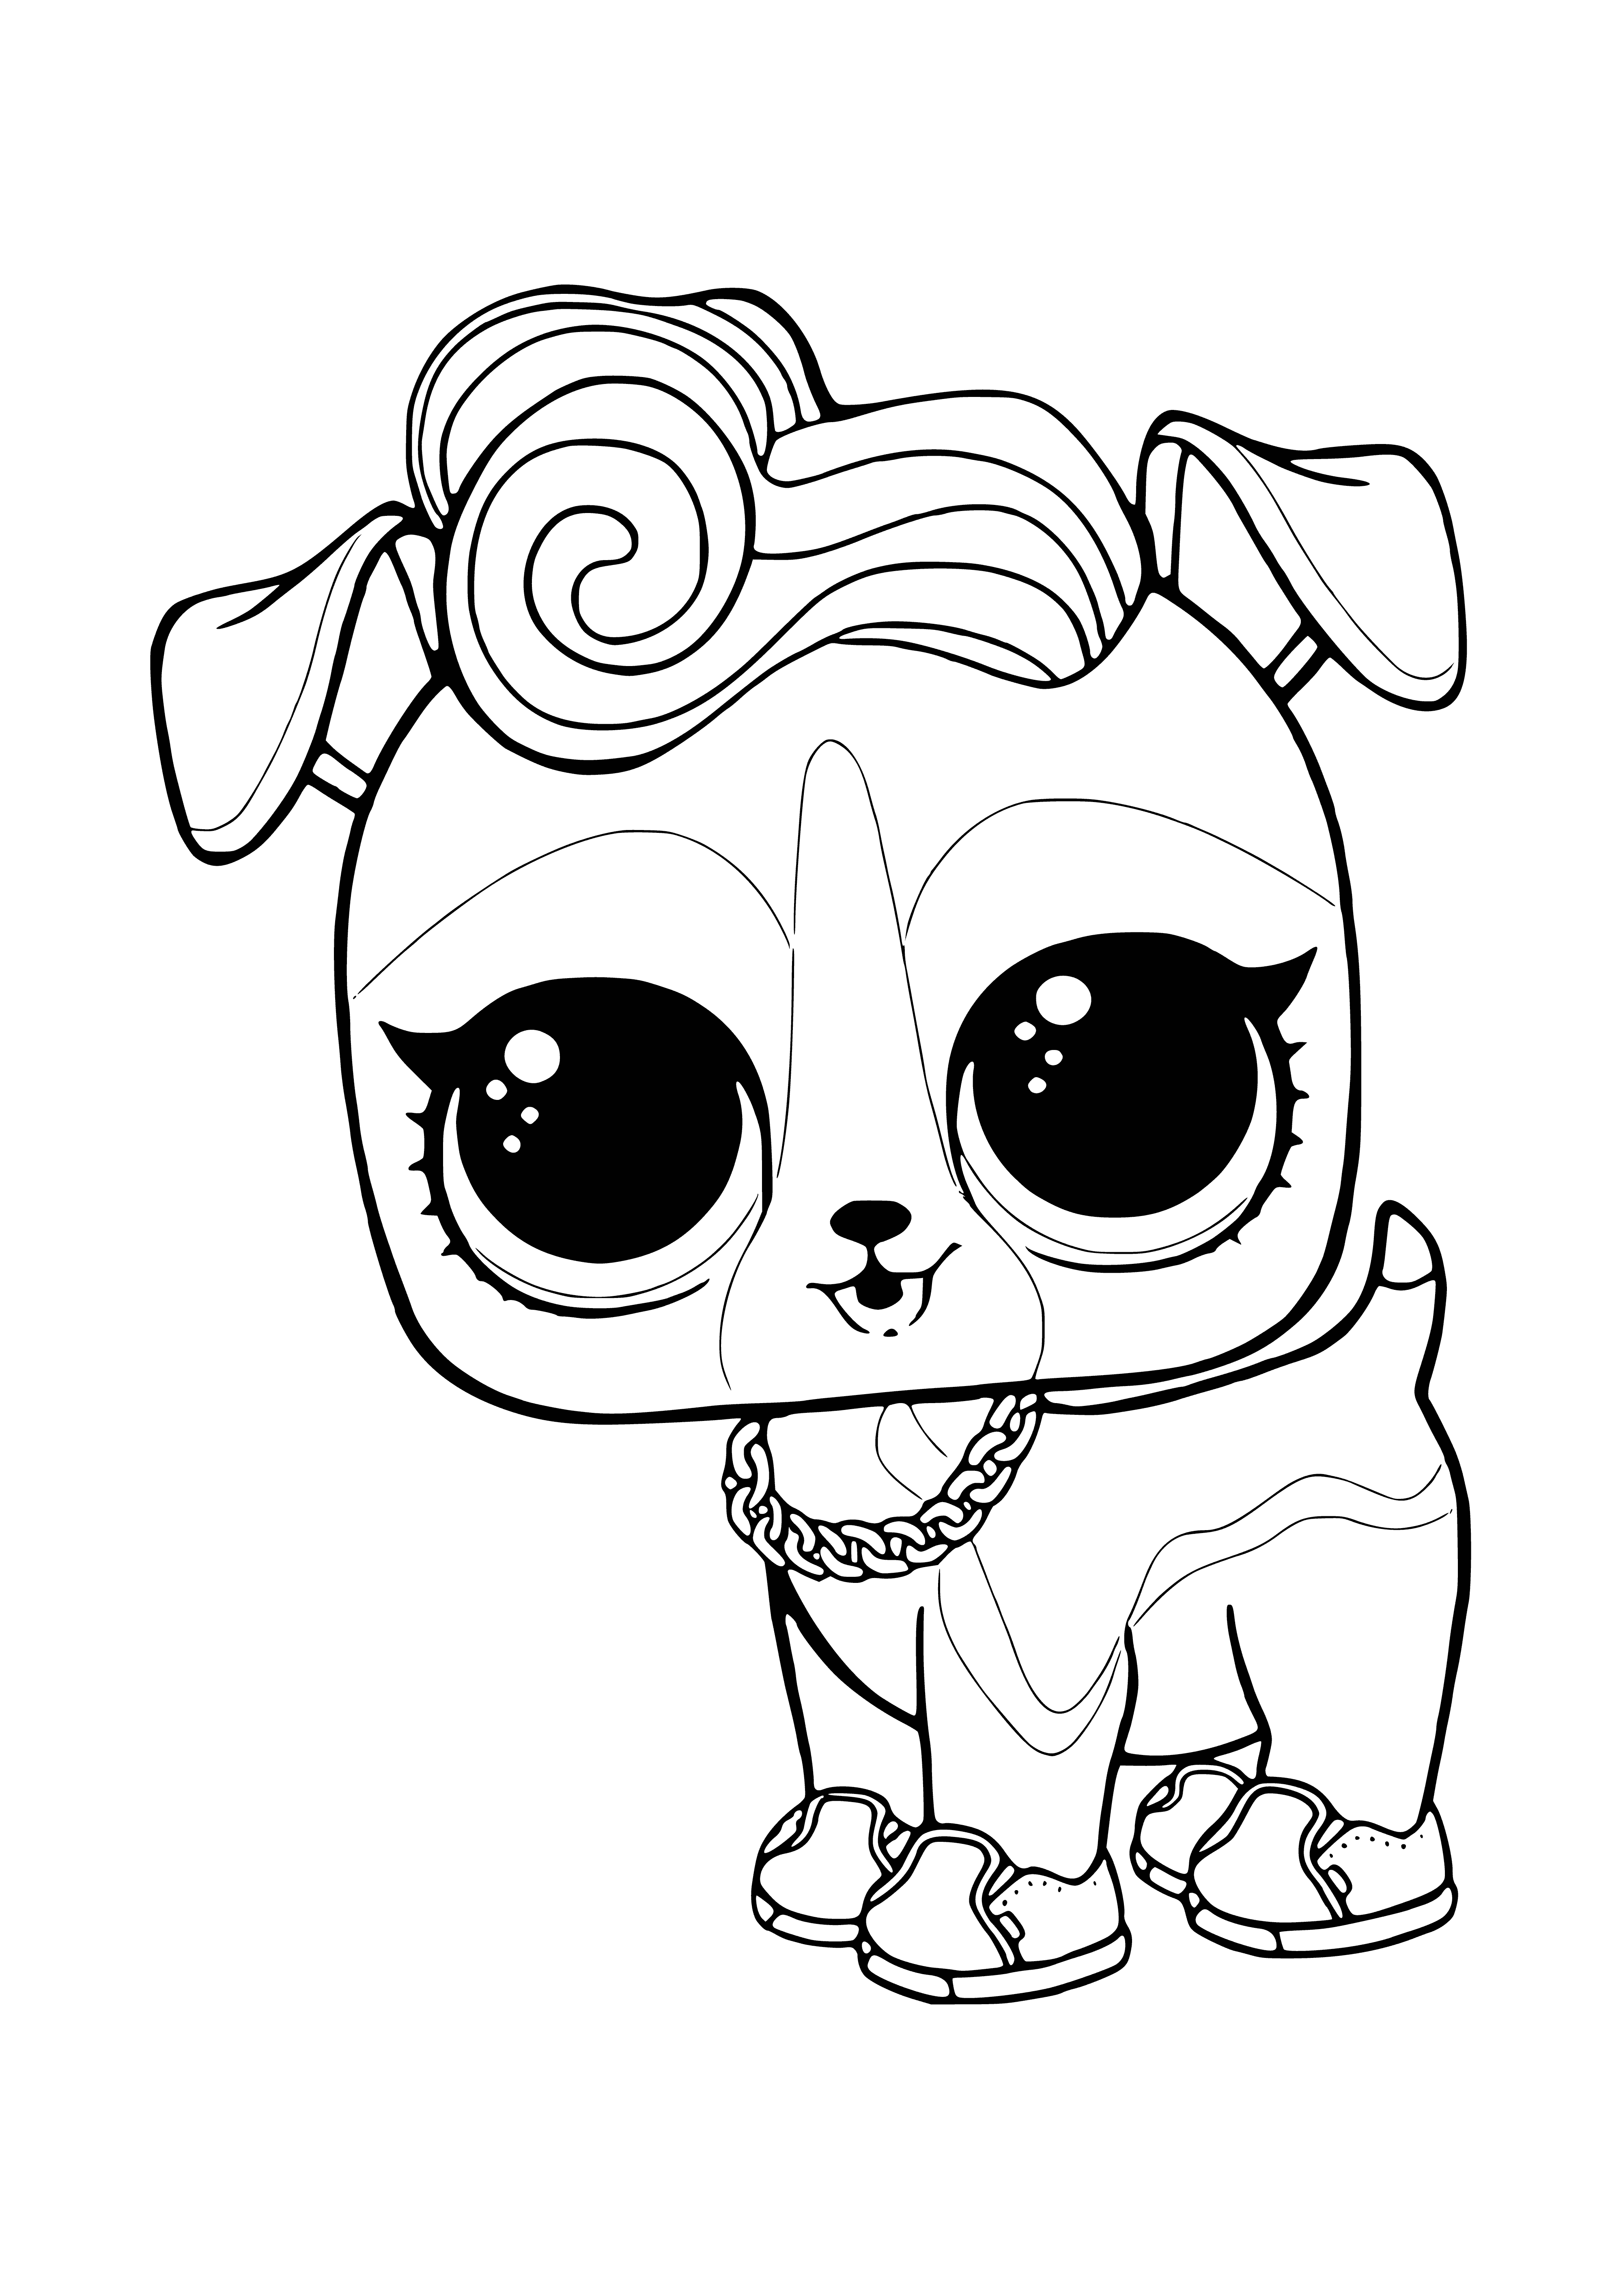 coloring page: Adorable electronic puppy with black and white coat and big blue eyes wearing headphones and with speaker in its mouth.